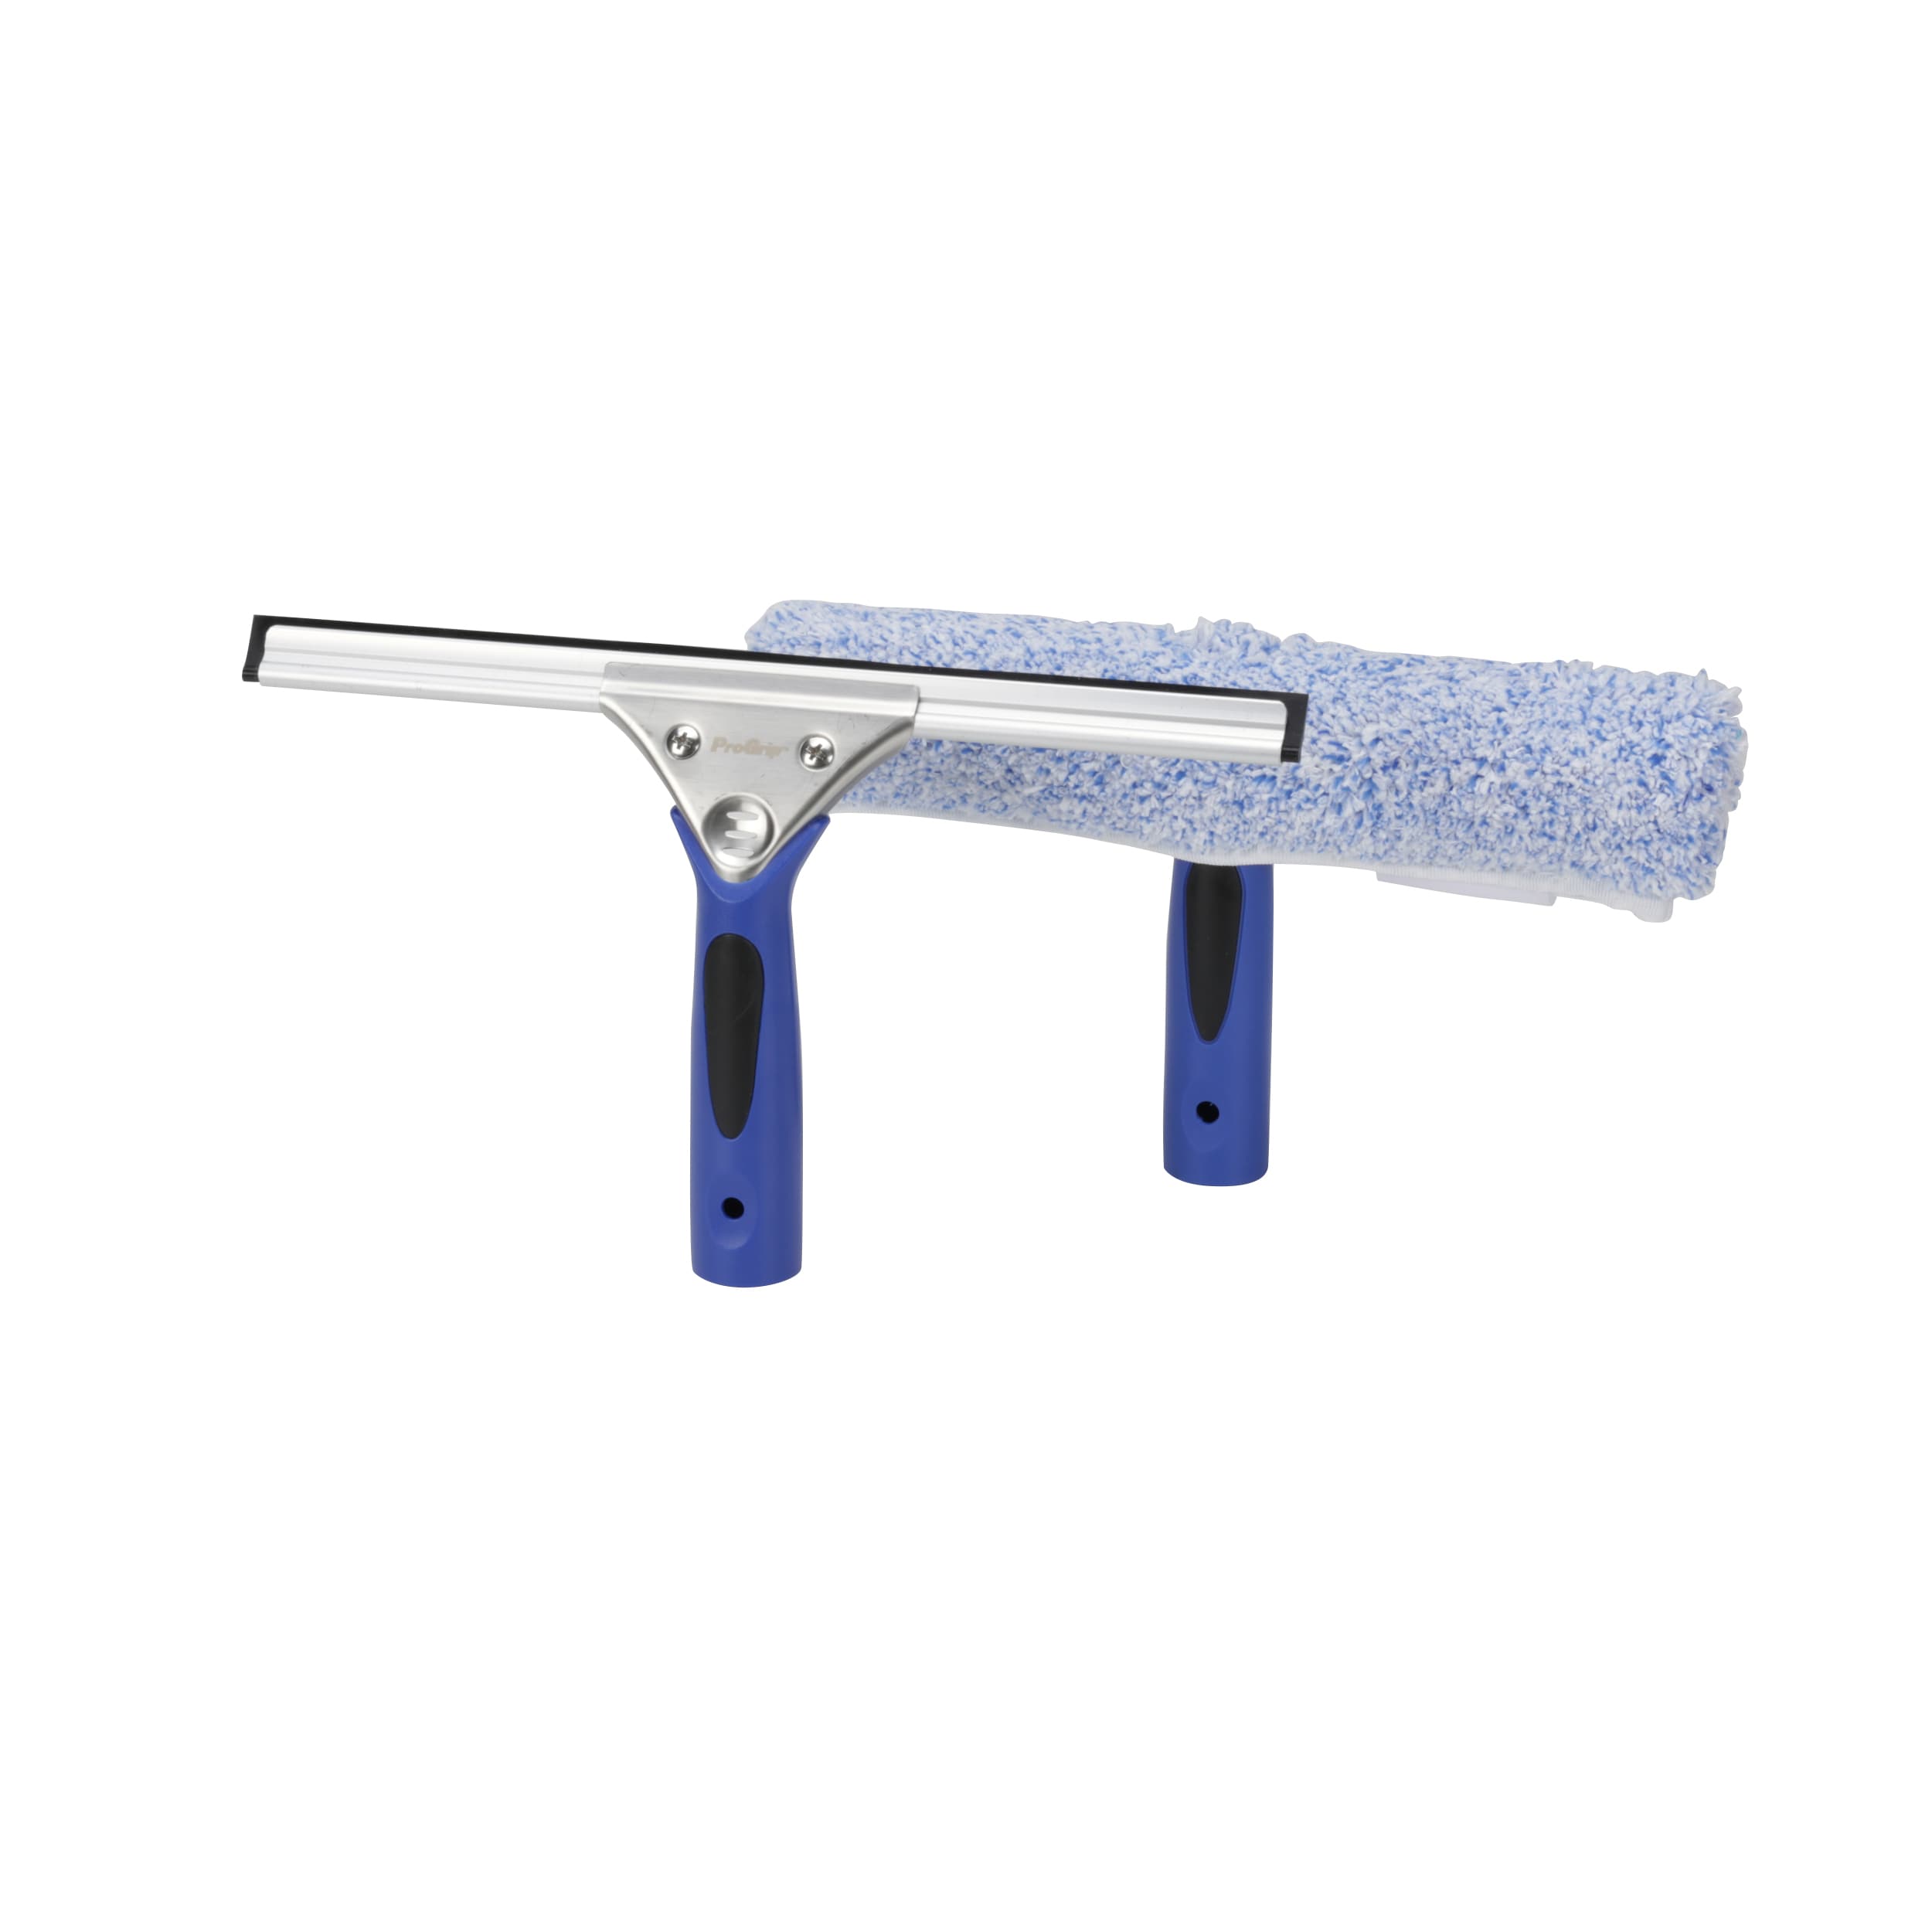 Ettore ProGrip Rubber Window Squeegee - Blue, Single Straight Blade,  Click-Lock Handle, Microfiber Washer Sleeve - Long-Lasting Silicone Blade